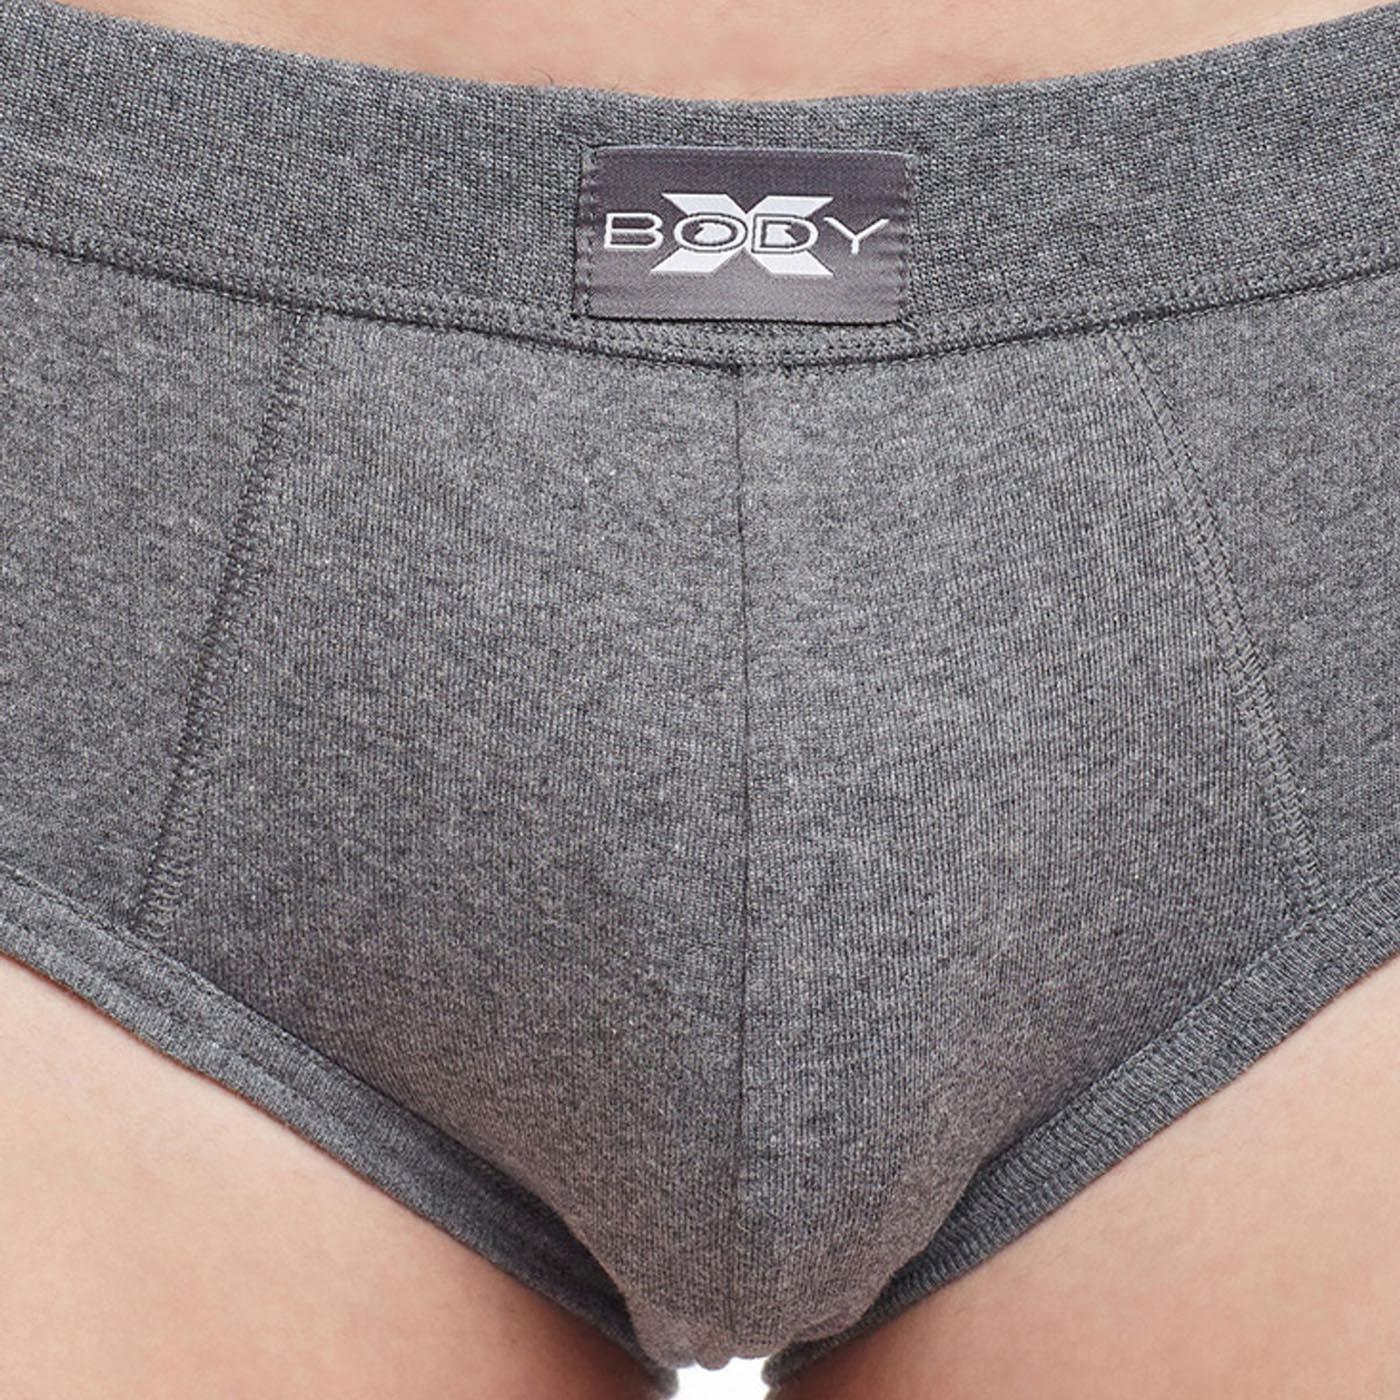 Bodycare on X: Seriously X Rated Men Innerwear - BodyX by